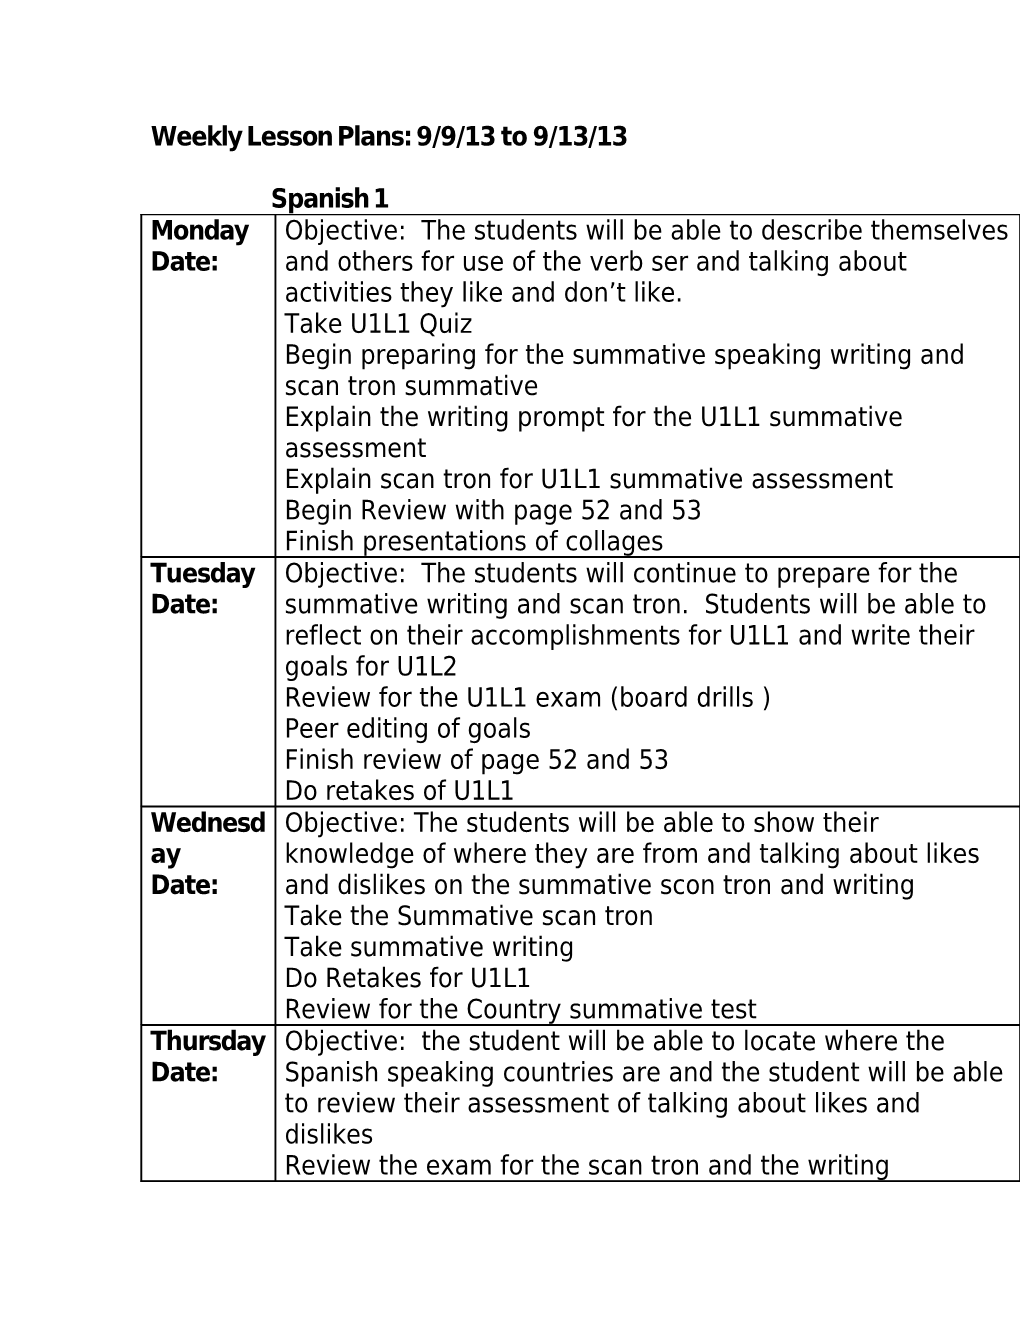 Weekly Lesson Plans: 9/9/13 to 9/13/13